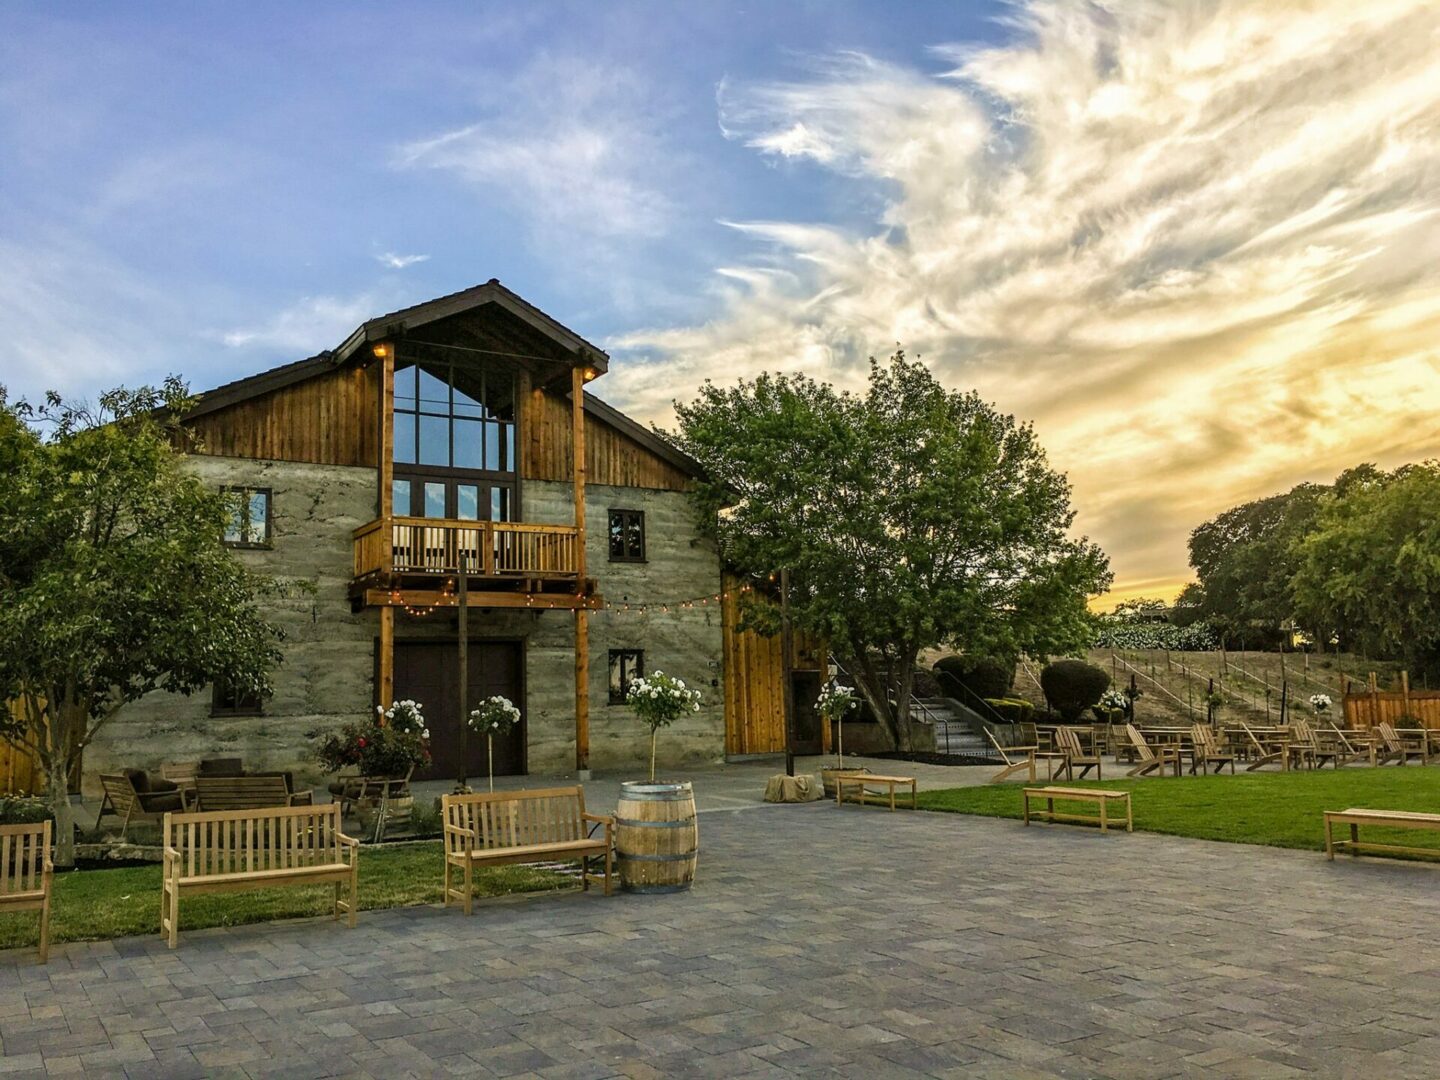 Exterior shot of Murrieta's Well in Livermore, CA at sunset